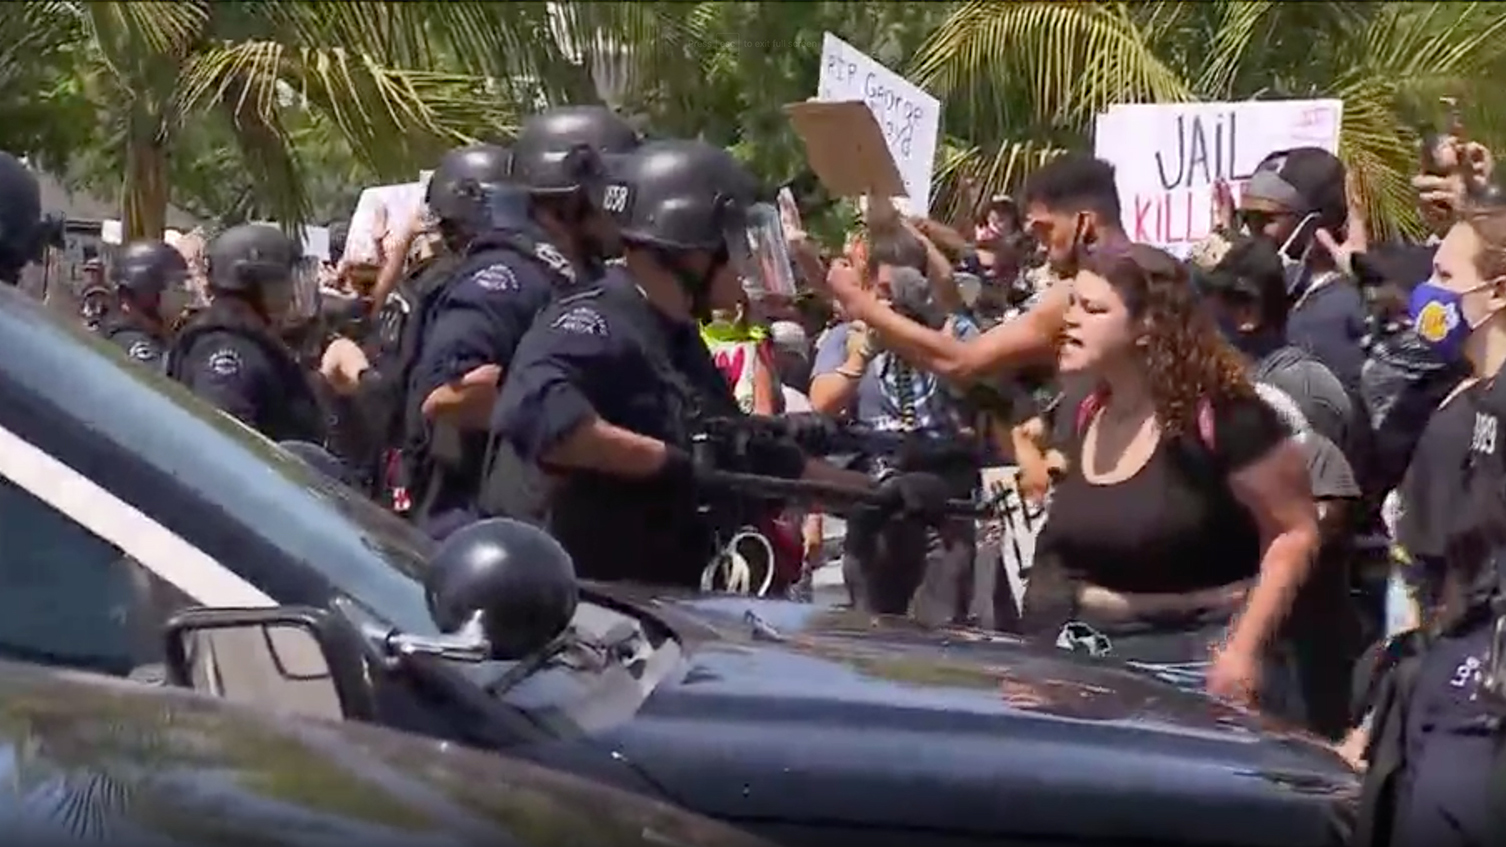 Protesters yell at police while rubber bullets are fired at the crowd in Los Angeles, on May 30.